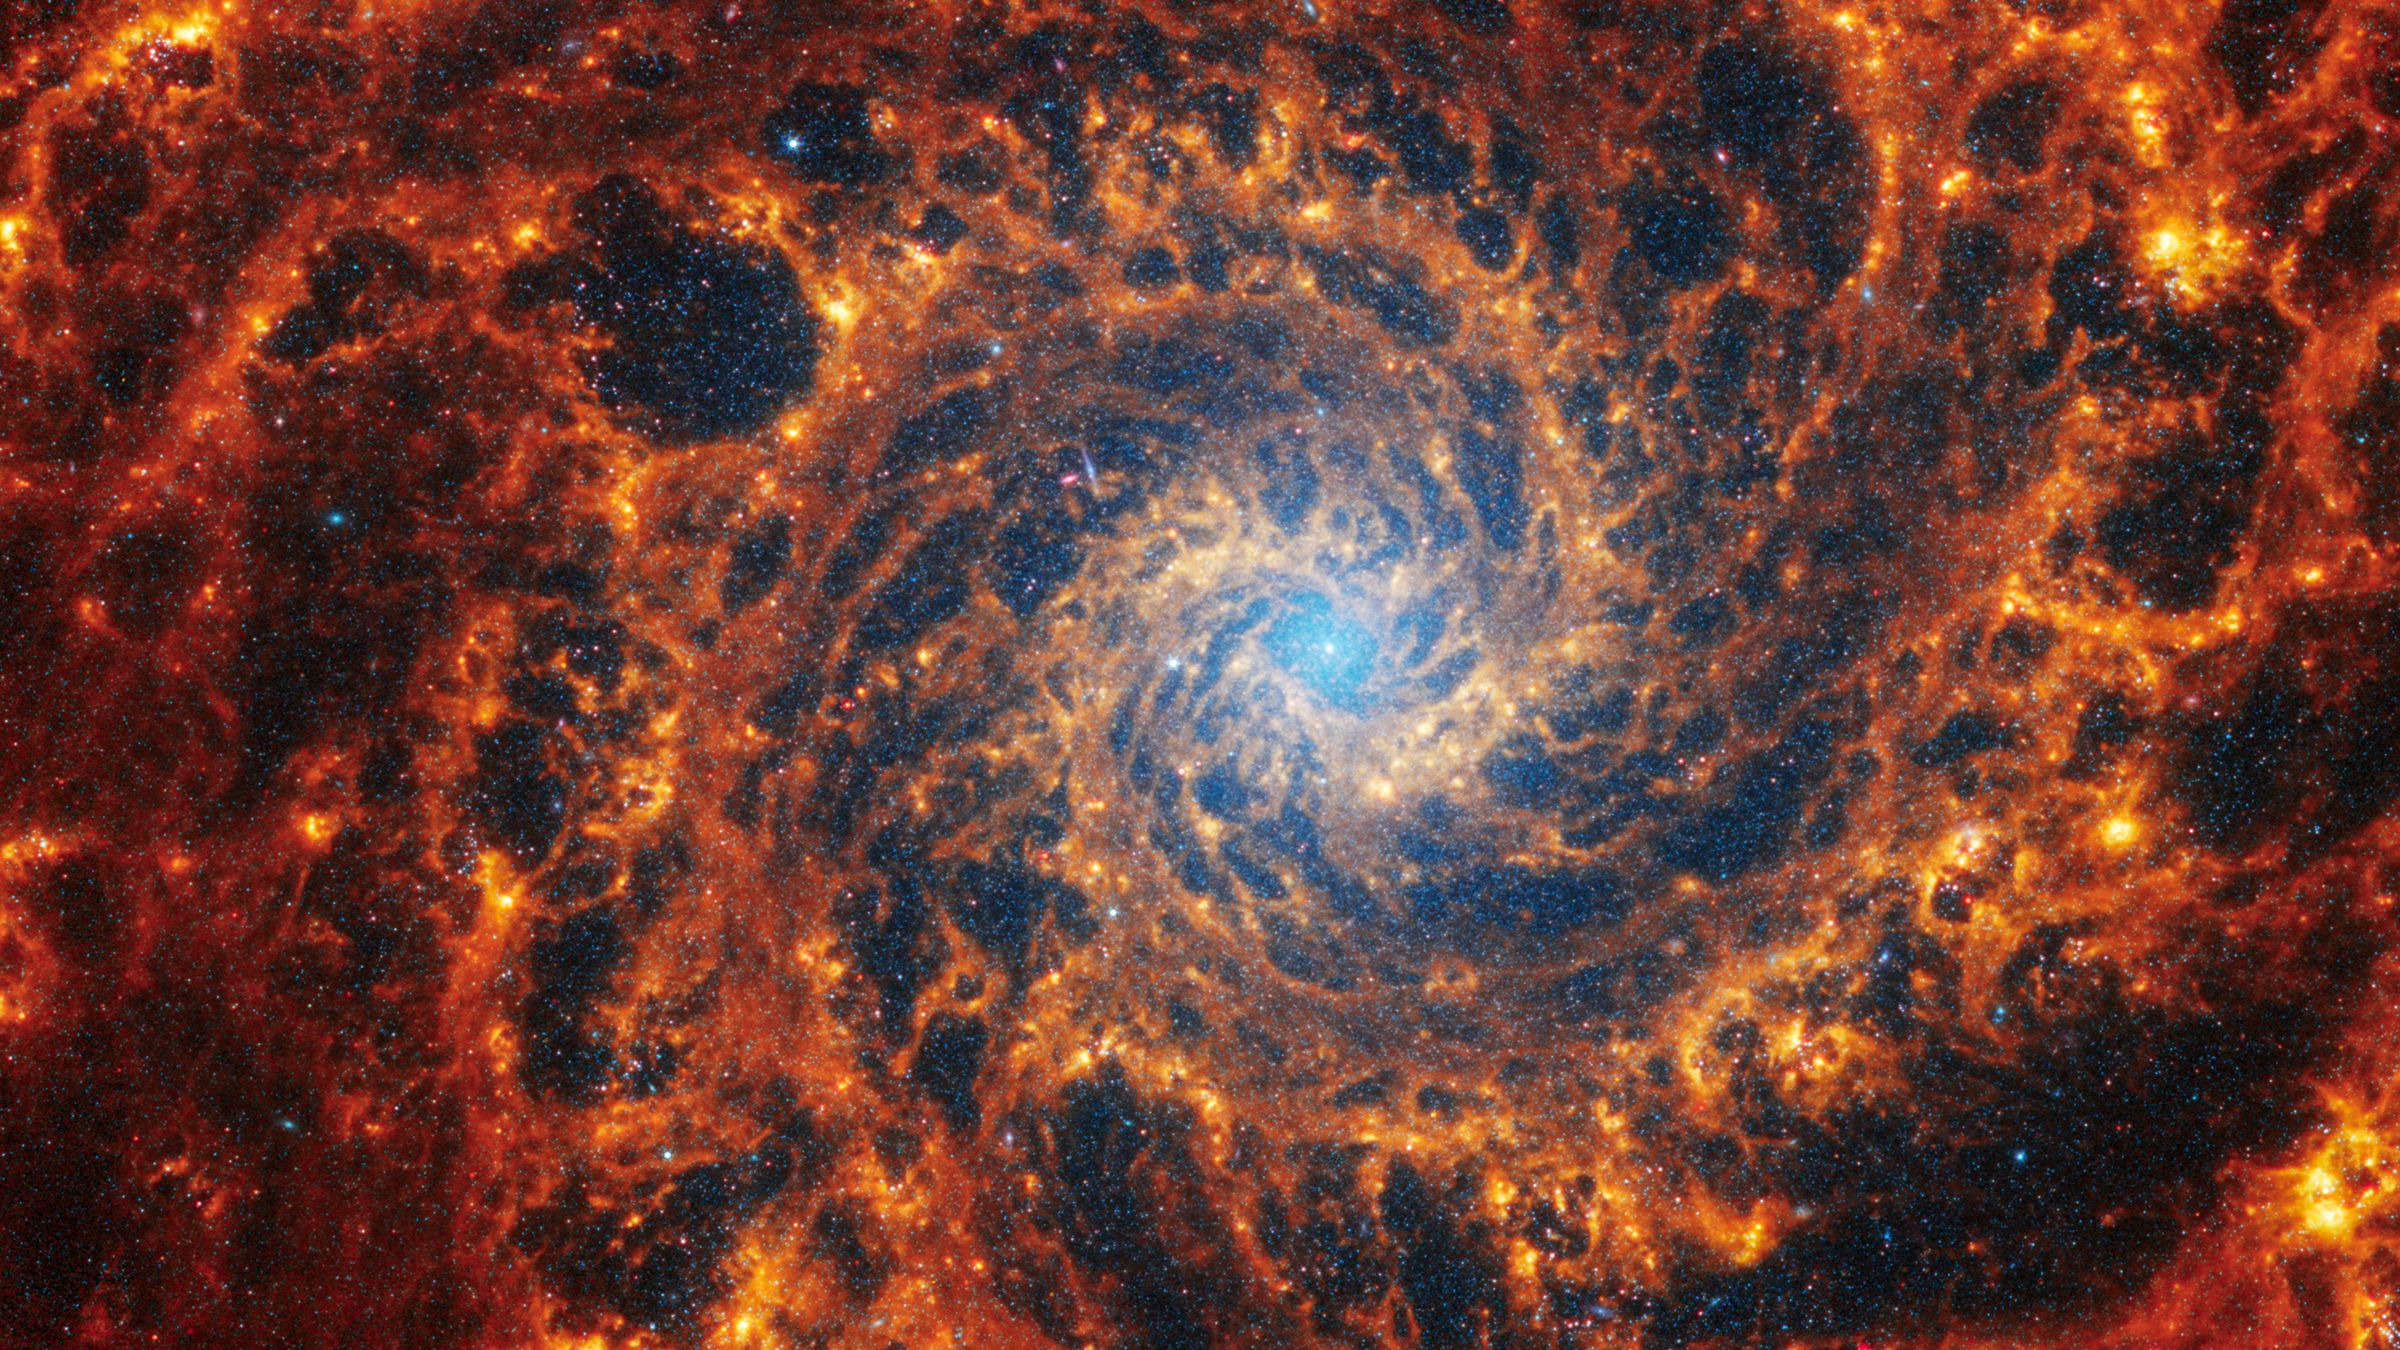 A dramatic spiral galaxy with orange and red arms and a light blue center